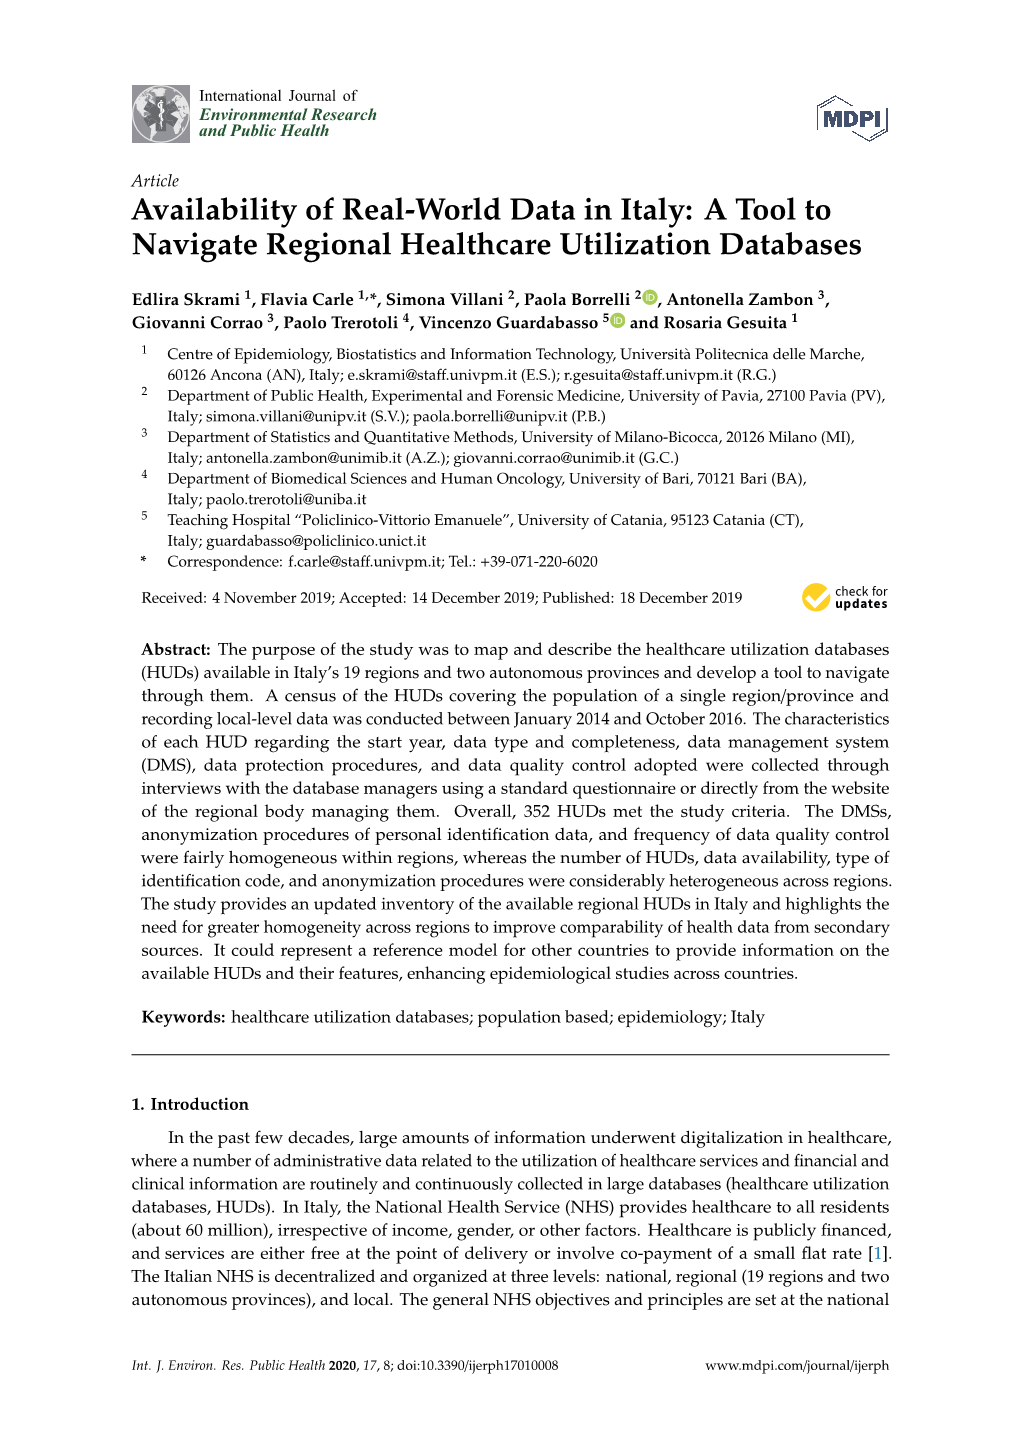 Availability of Real-World Data in Italy: a Tool to Navigate Regional Healthcare Utilization Databases